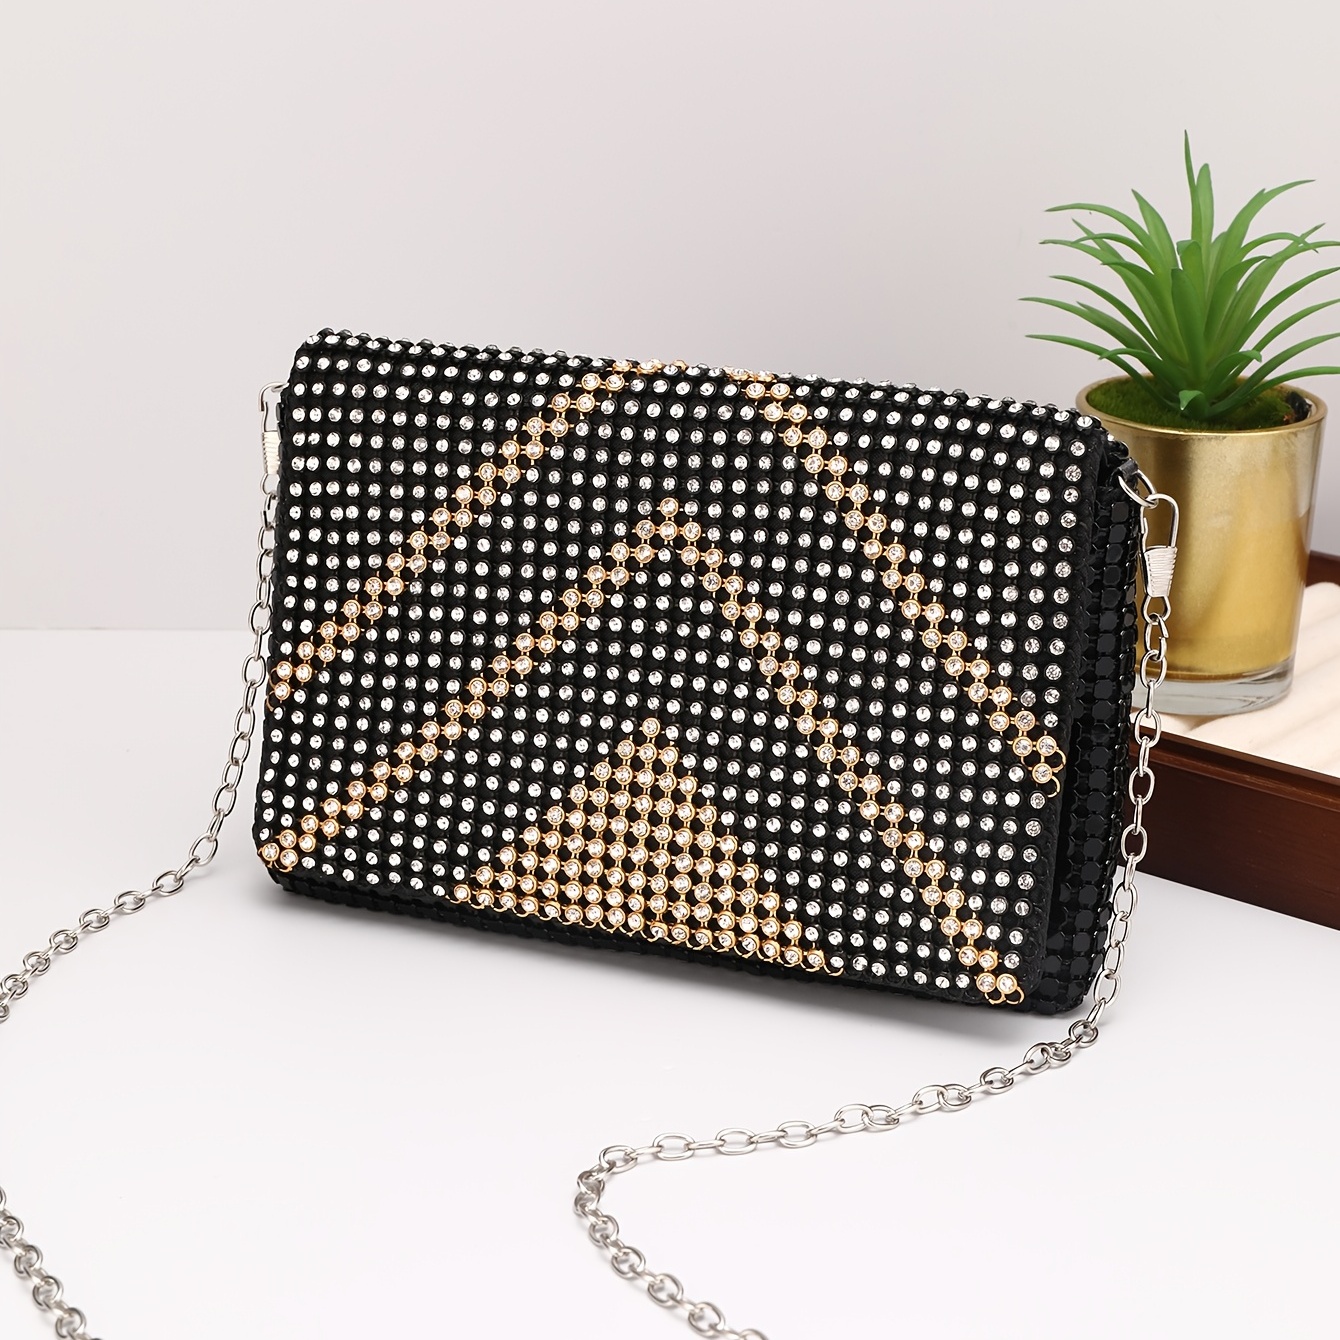 Black womens evening bags with chain